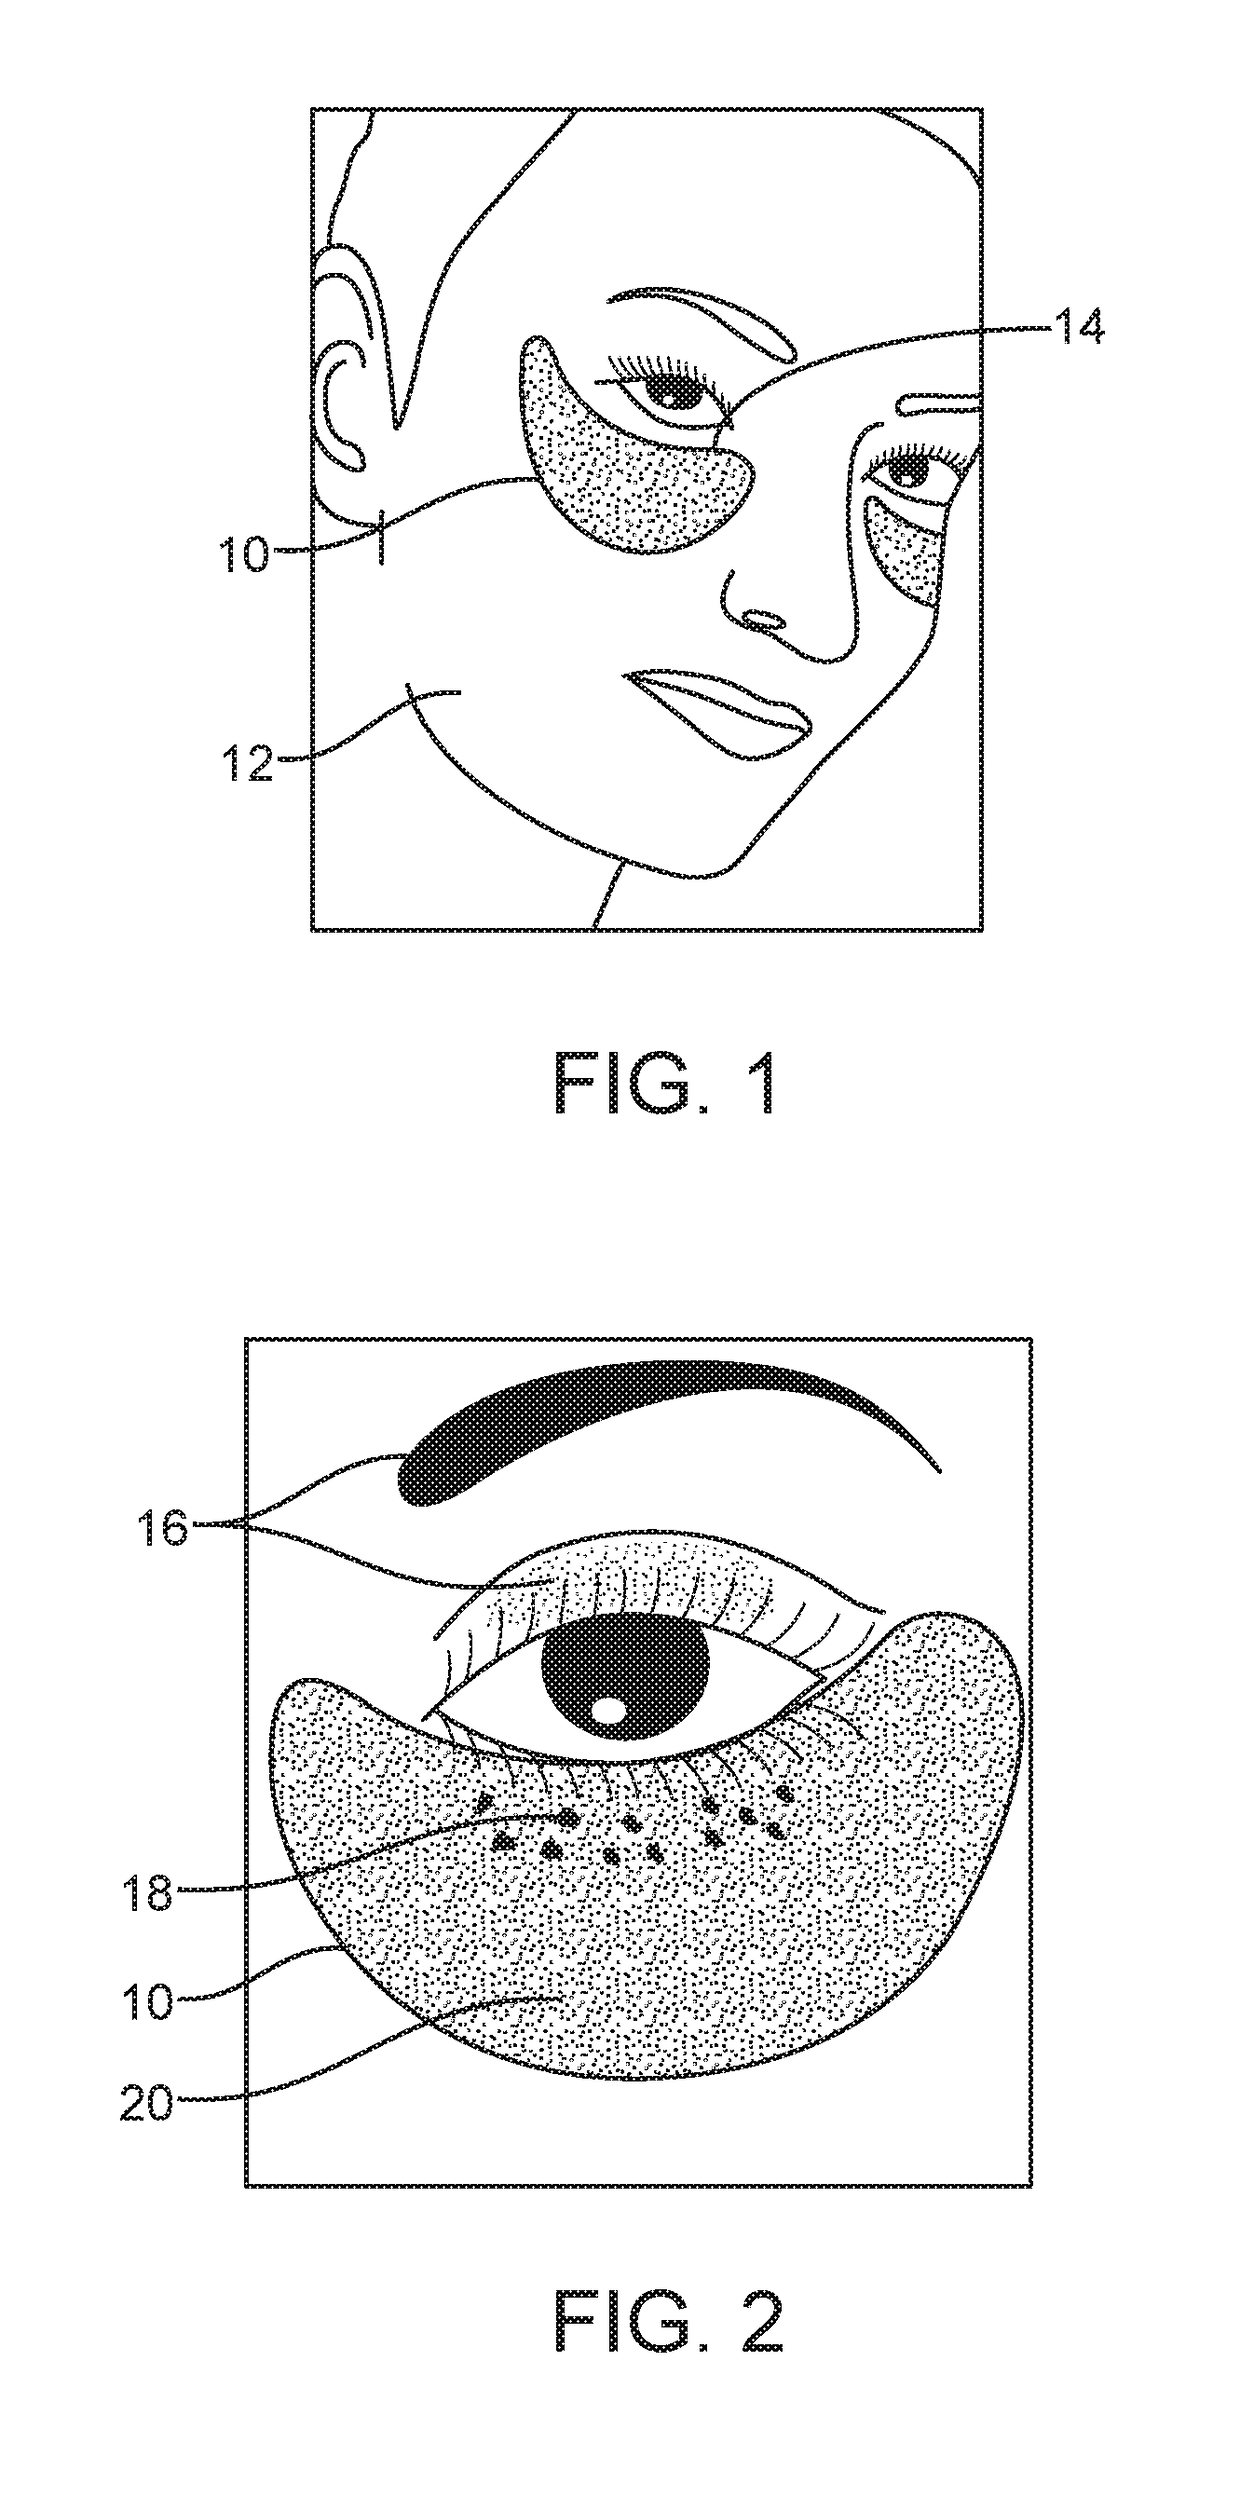 Integrated under-eye mask and makeup capture device